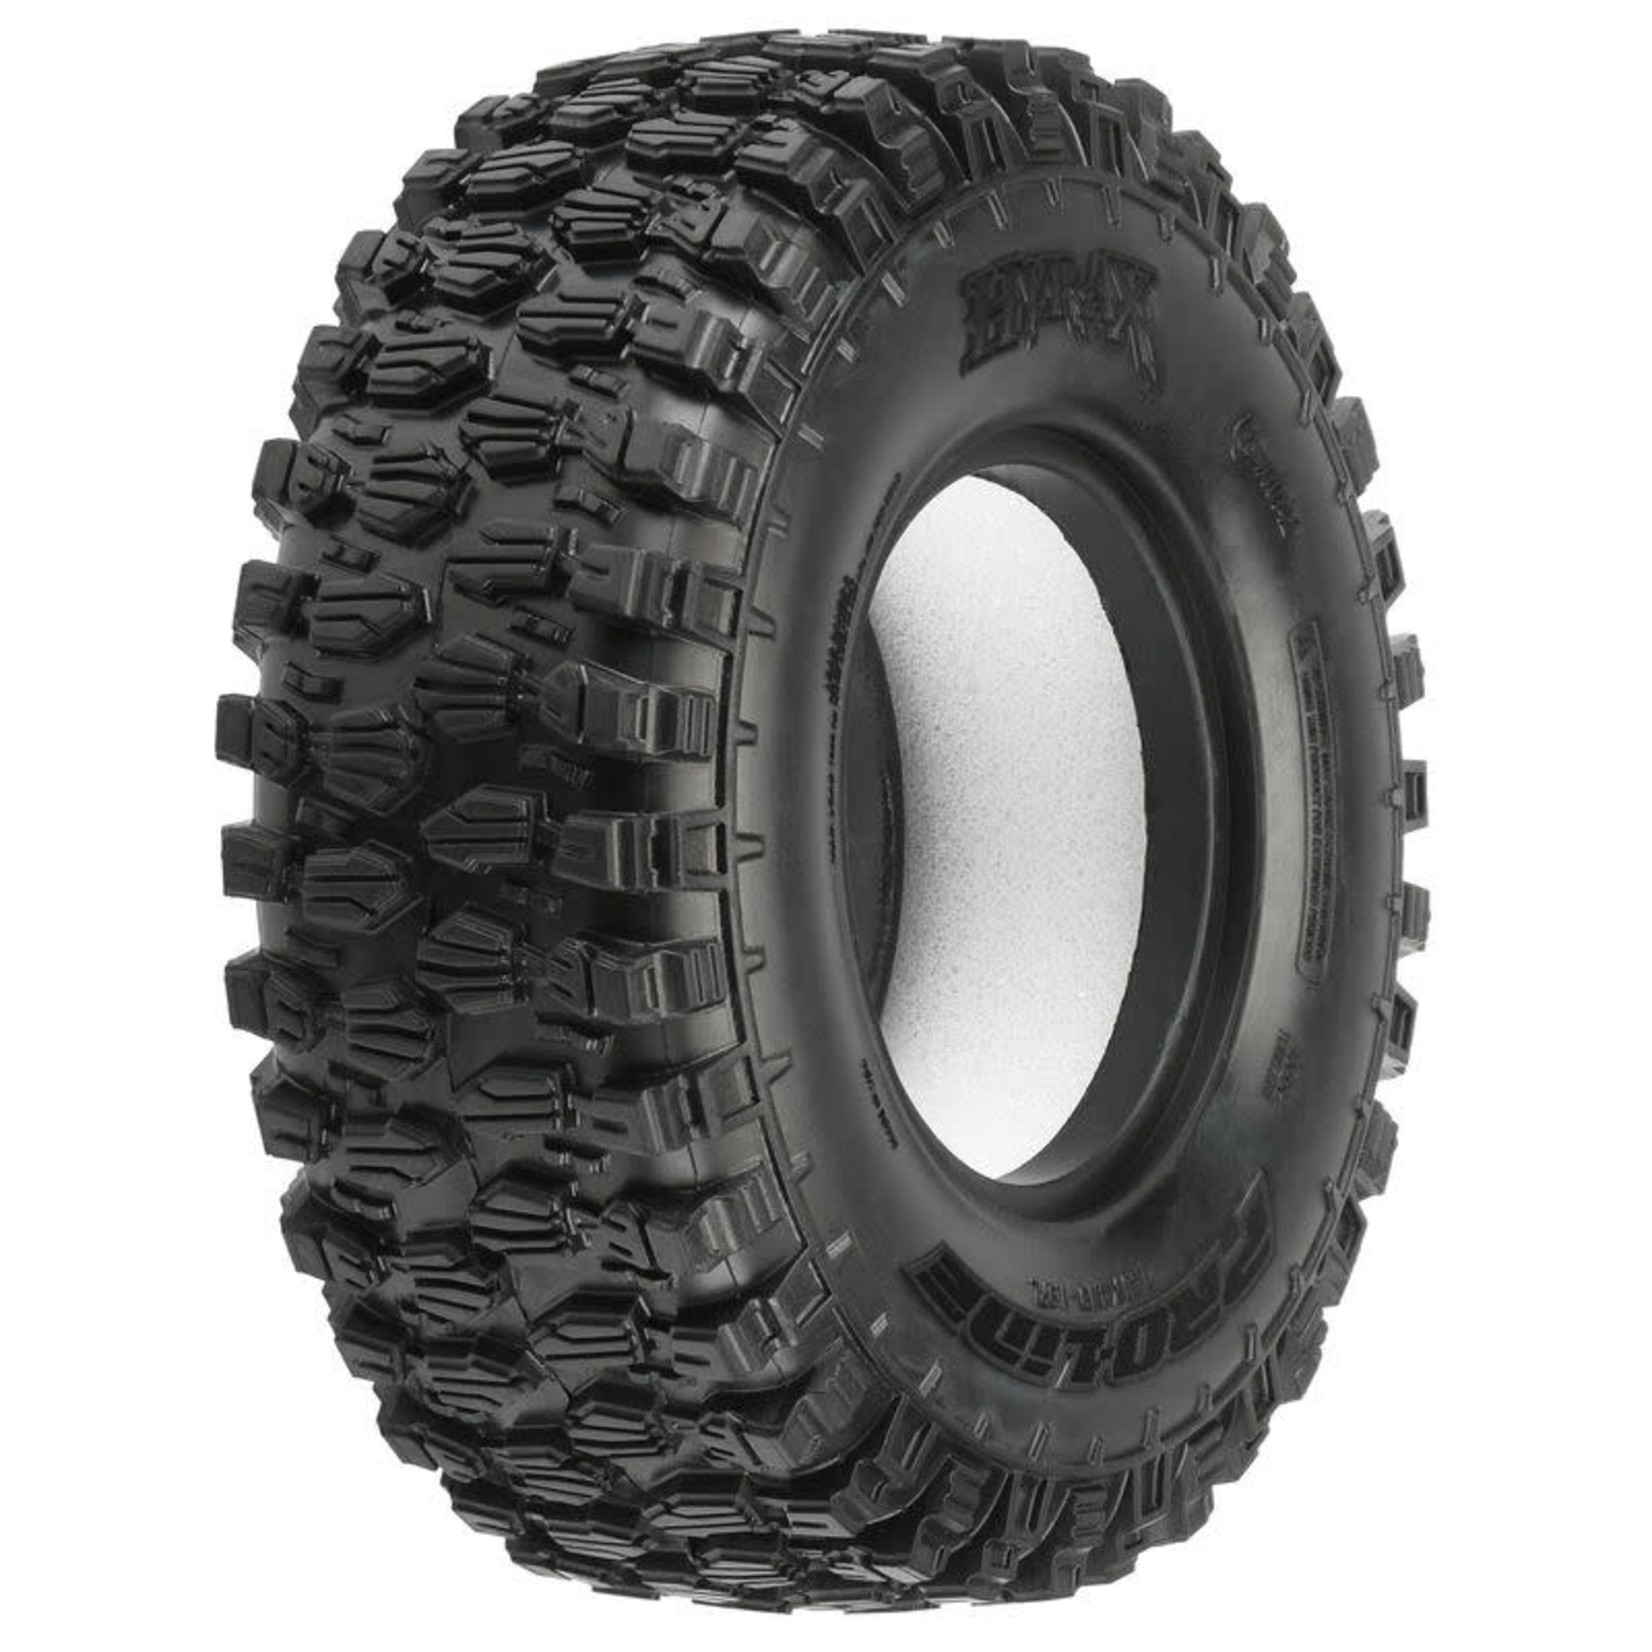 Pro-line Racing PRO1014214 Pro-Line 1/10 Class 1 Hyrax G8 Front/Rear 1.9" Rock Crawling Tires (2)